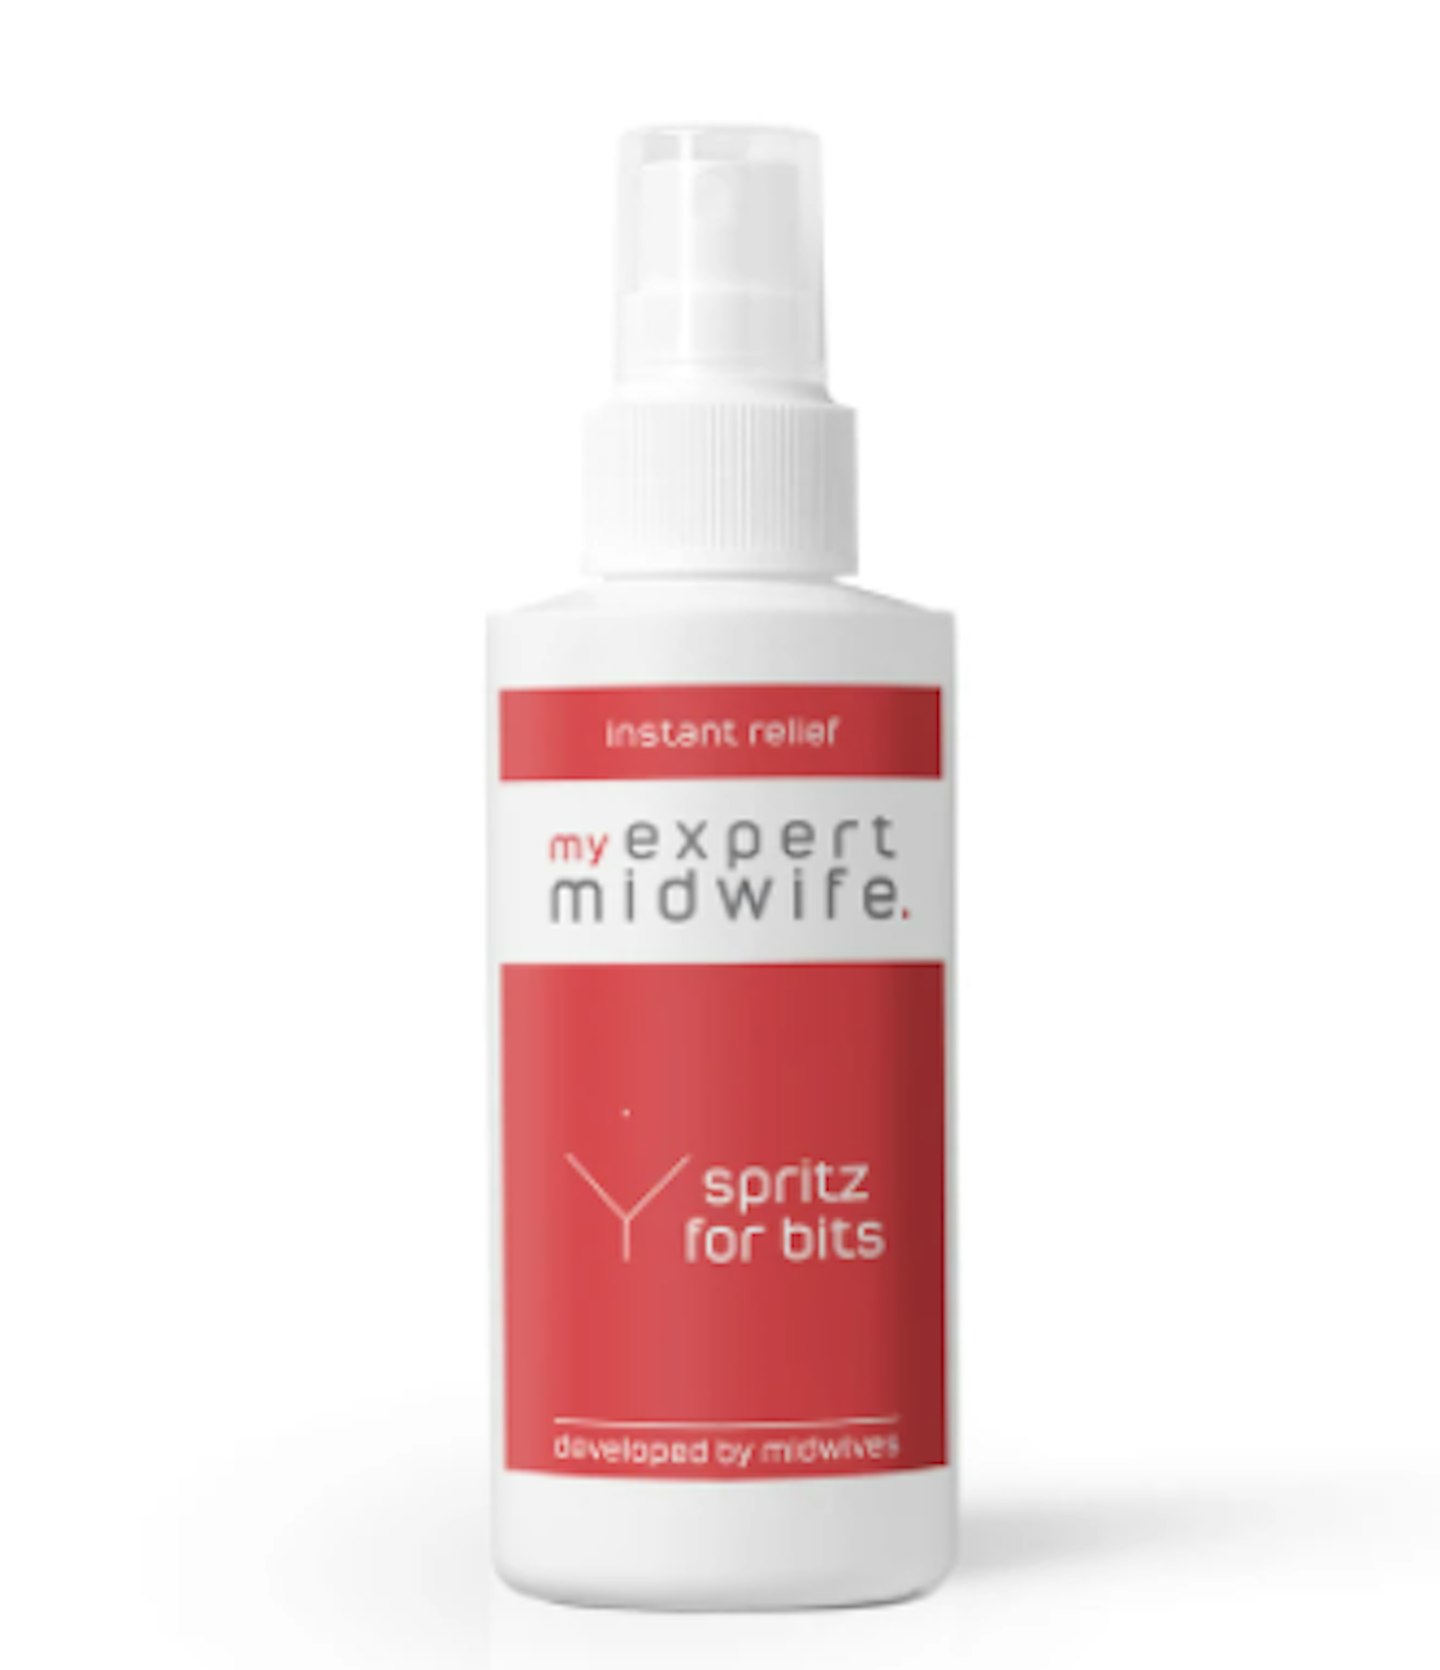 My Expert Midwife Spritz for Bits, £19